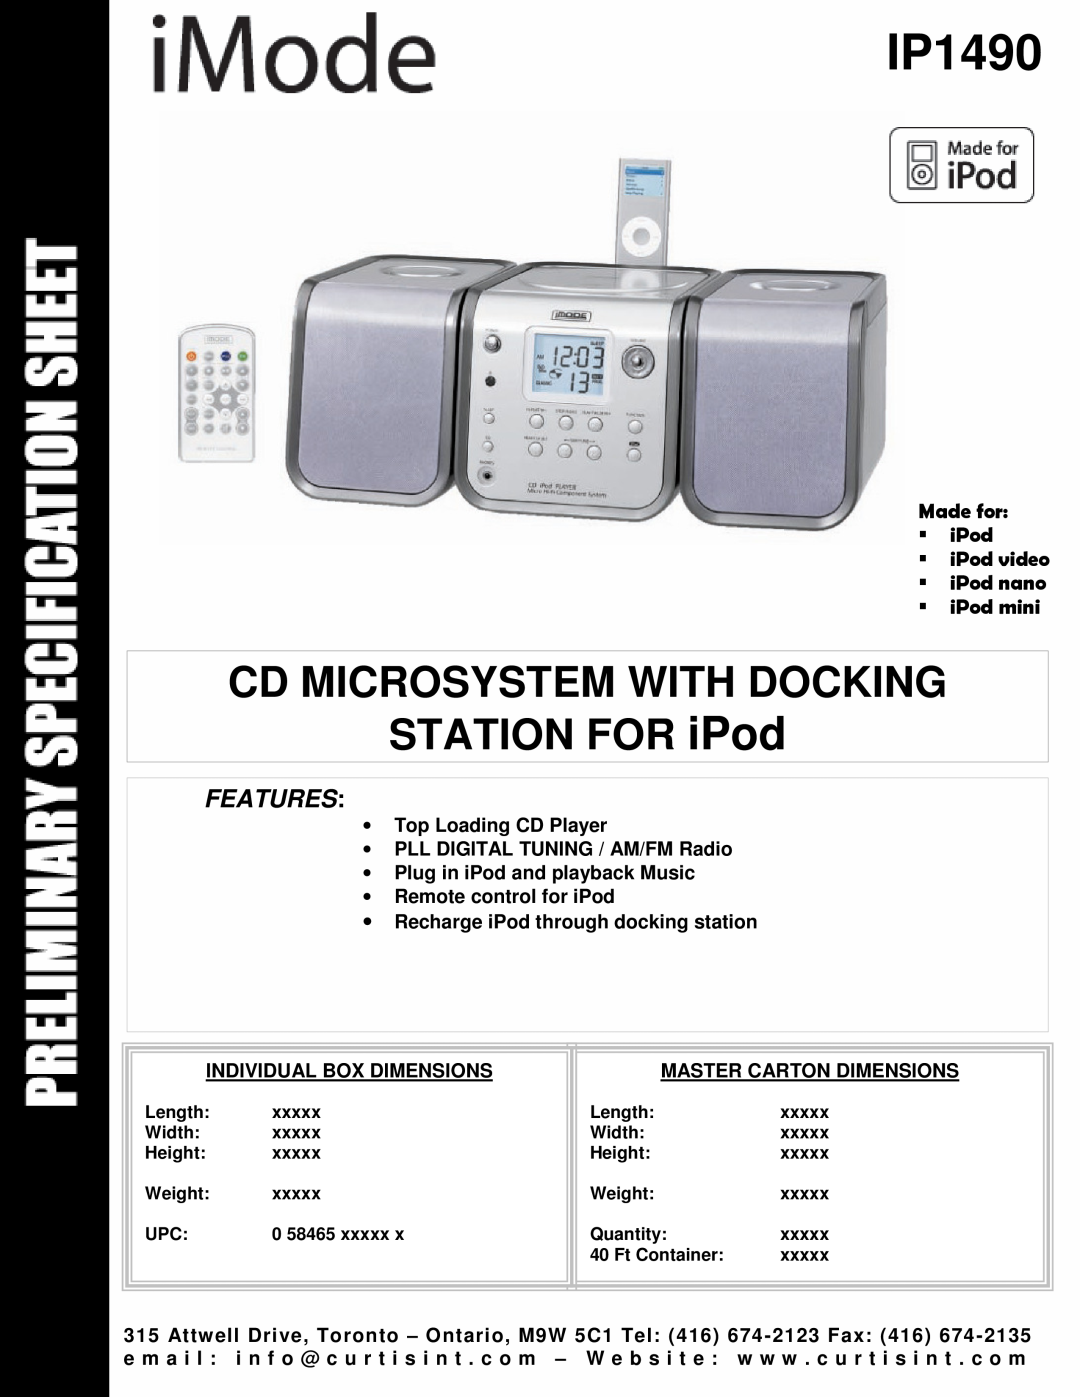 Curtis IP1490 dimensions CD MICROSYSTEM WITH DOCKING STATION FOR iPod, Features 